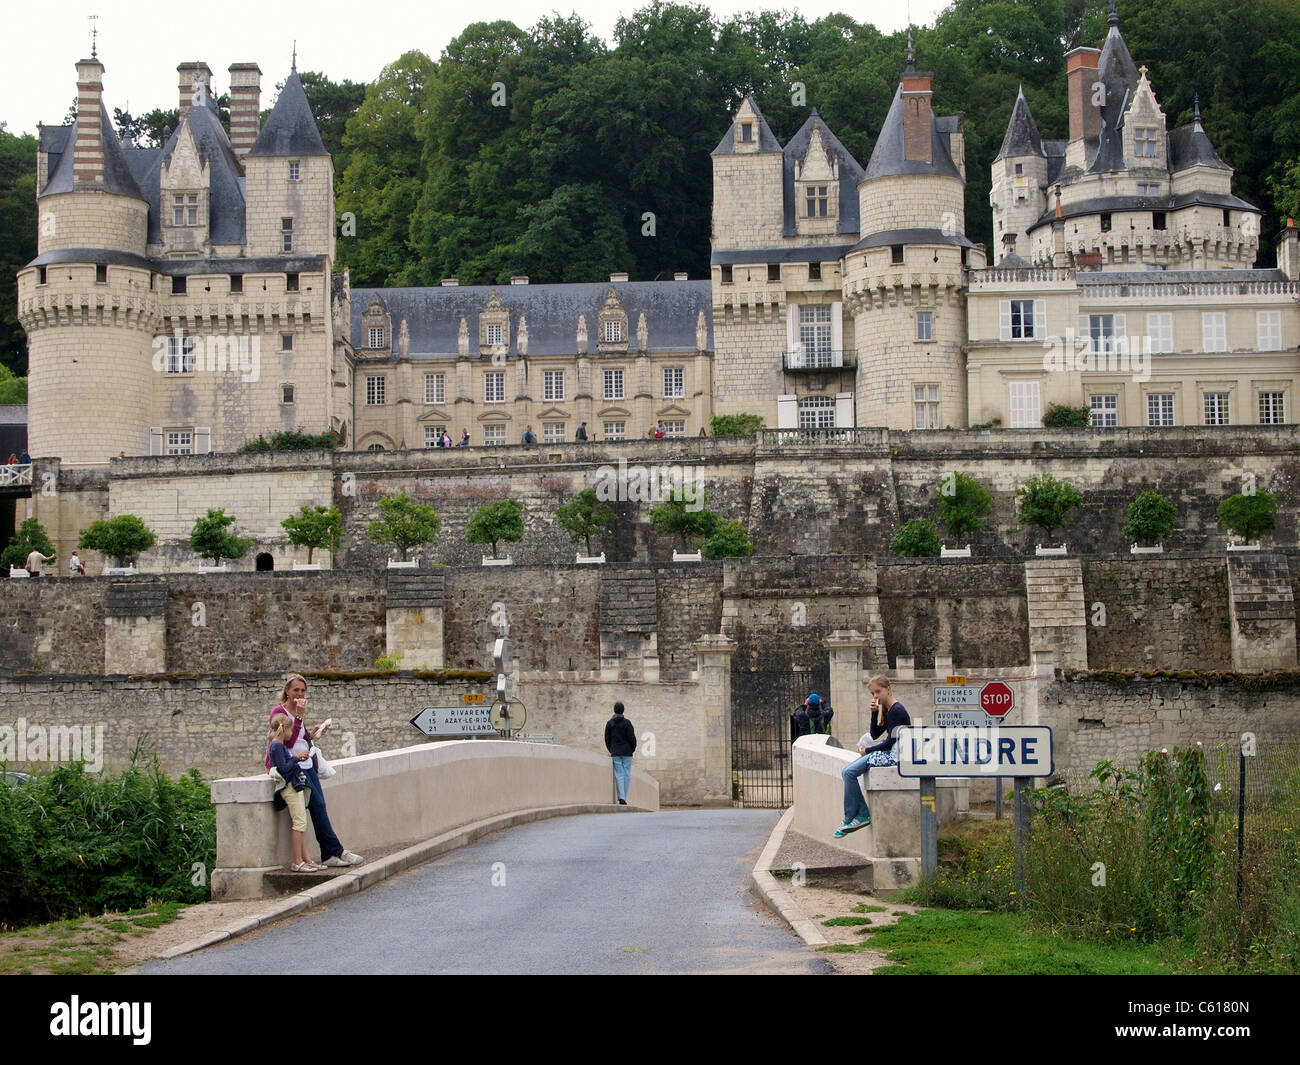 Chateau de Ussé in the Loire valley along the Indre river. France Stock Photo